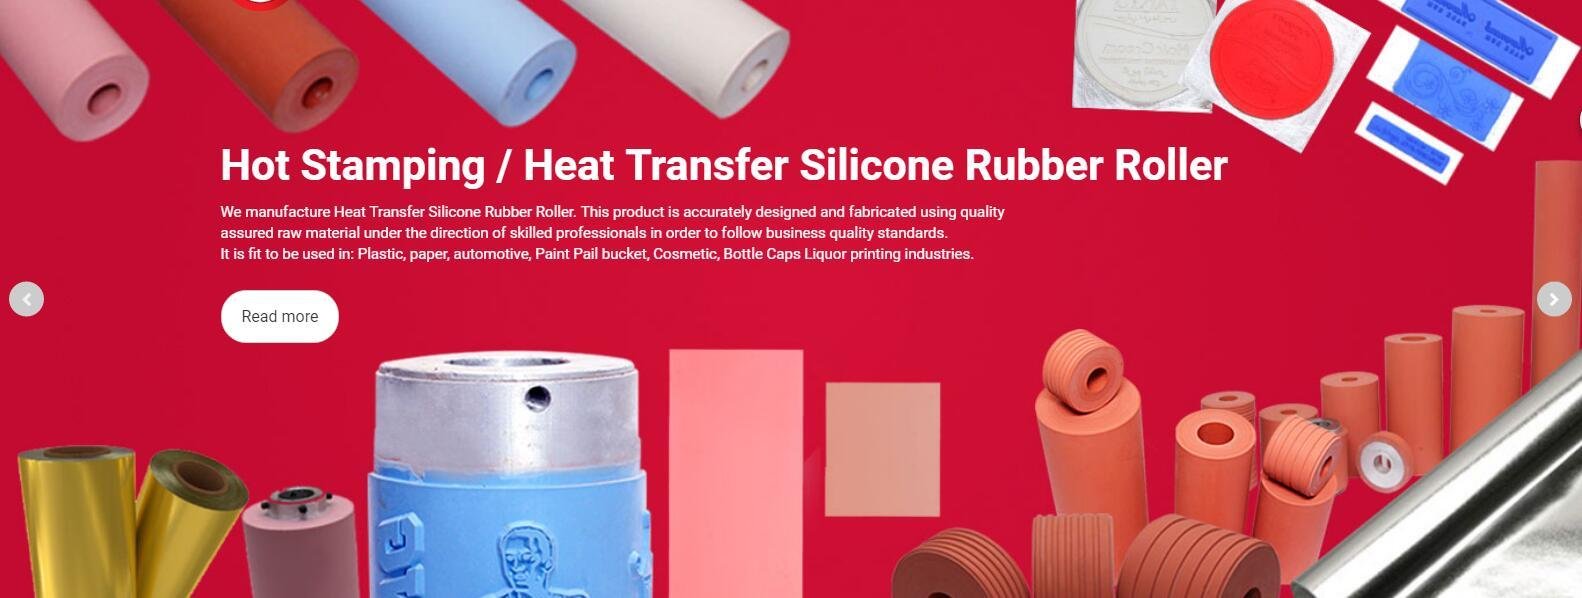 Silicone Rubber Sheets For Hot Stamp & Heat Transfer